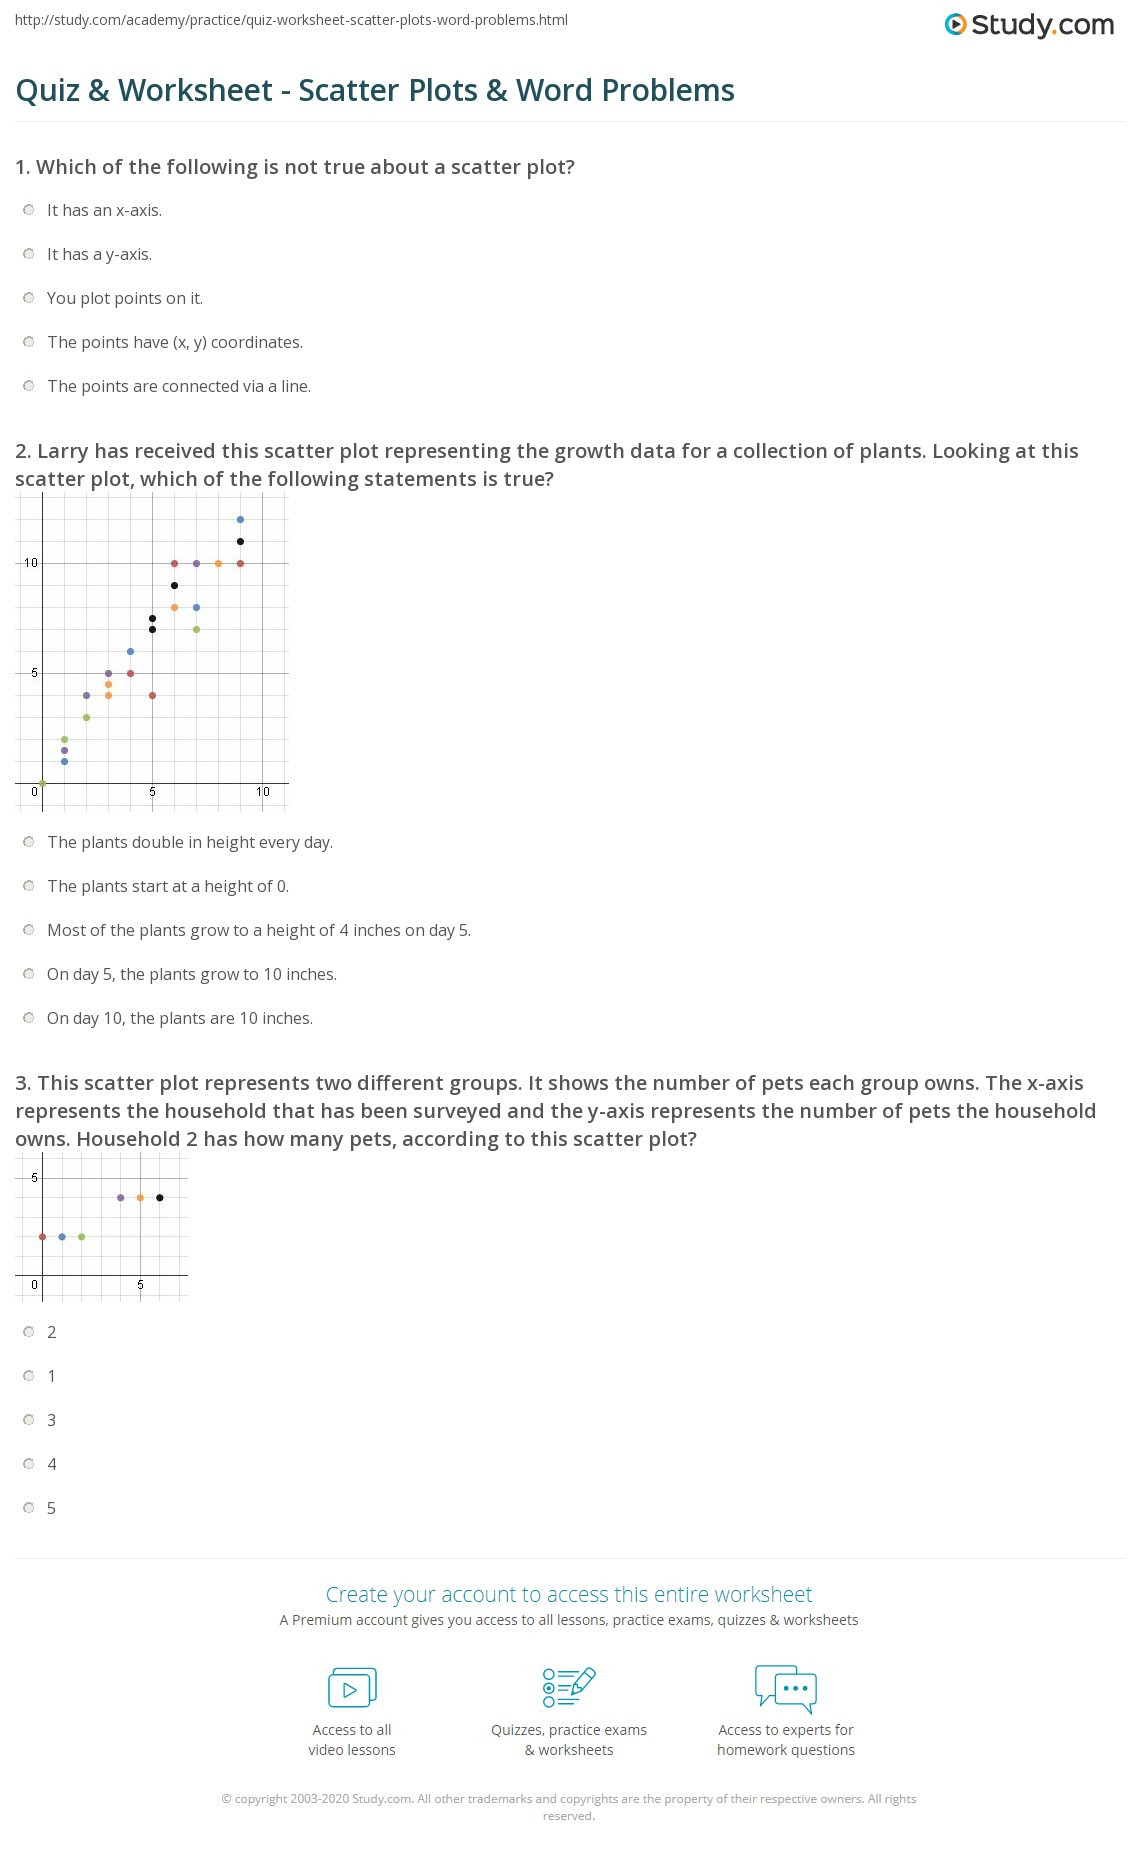 Scatter Plot Worksheet with Answers Quiz &amp; Worksheet Scatter Plots &amp; Word Problems